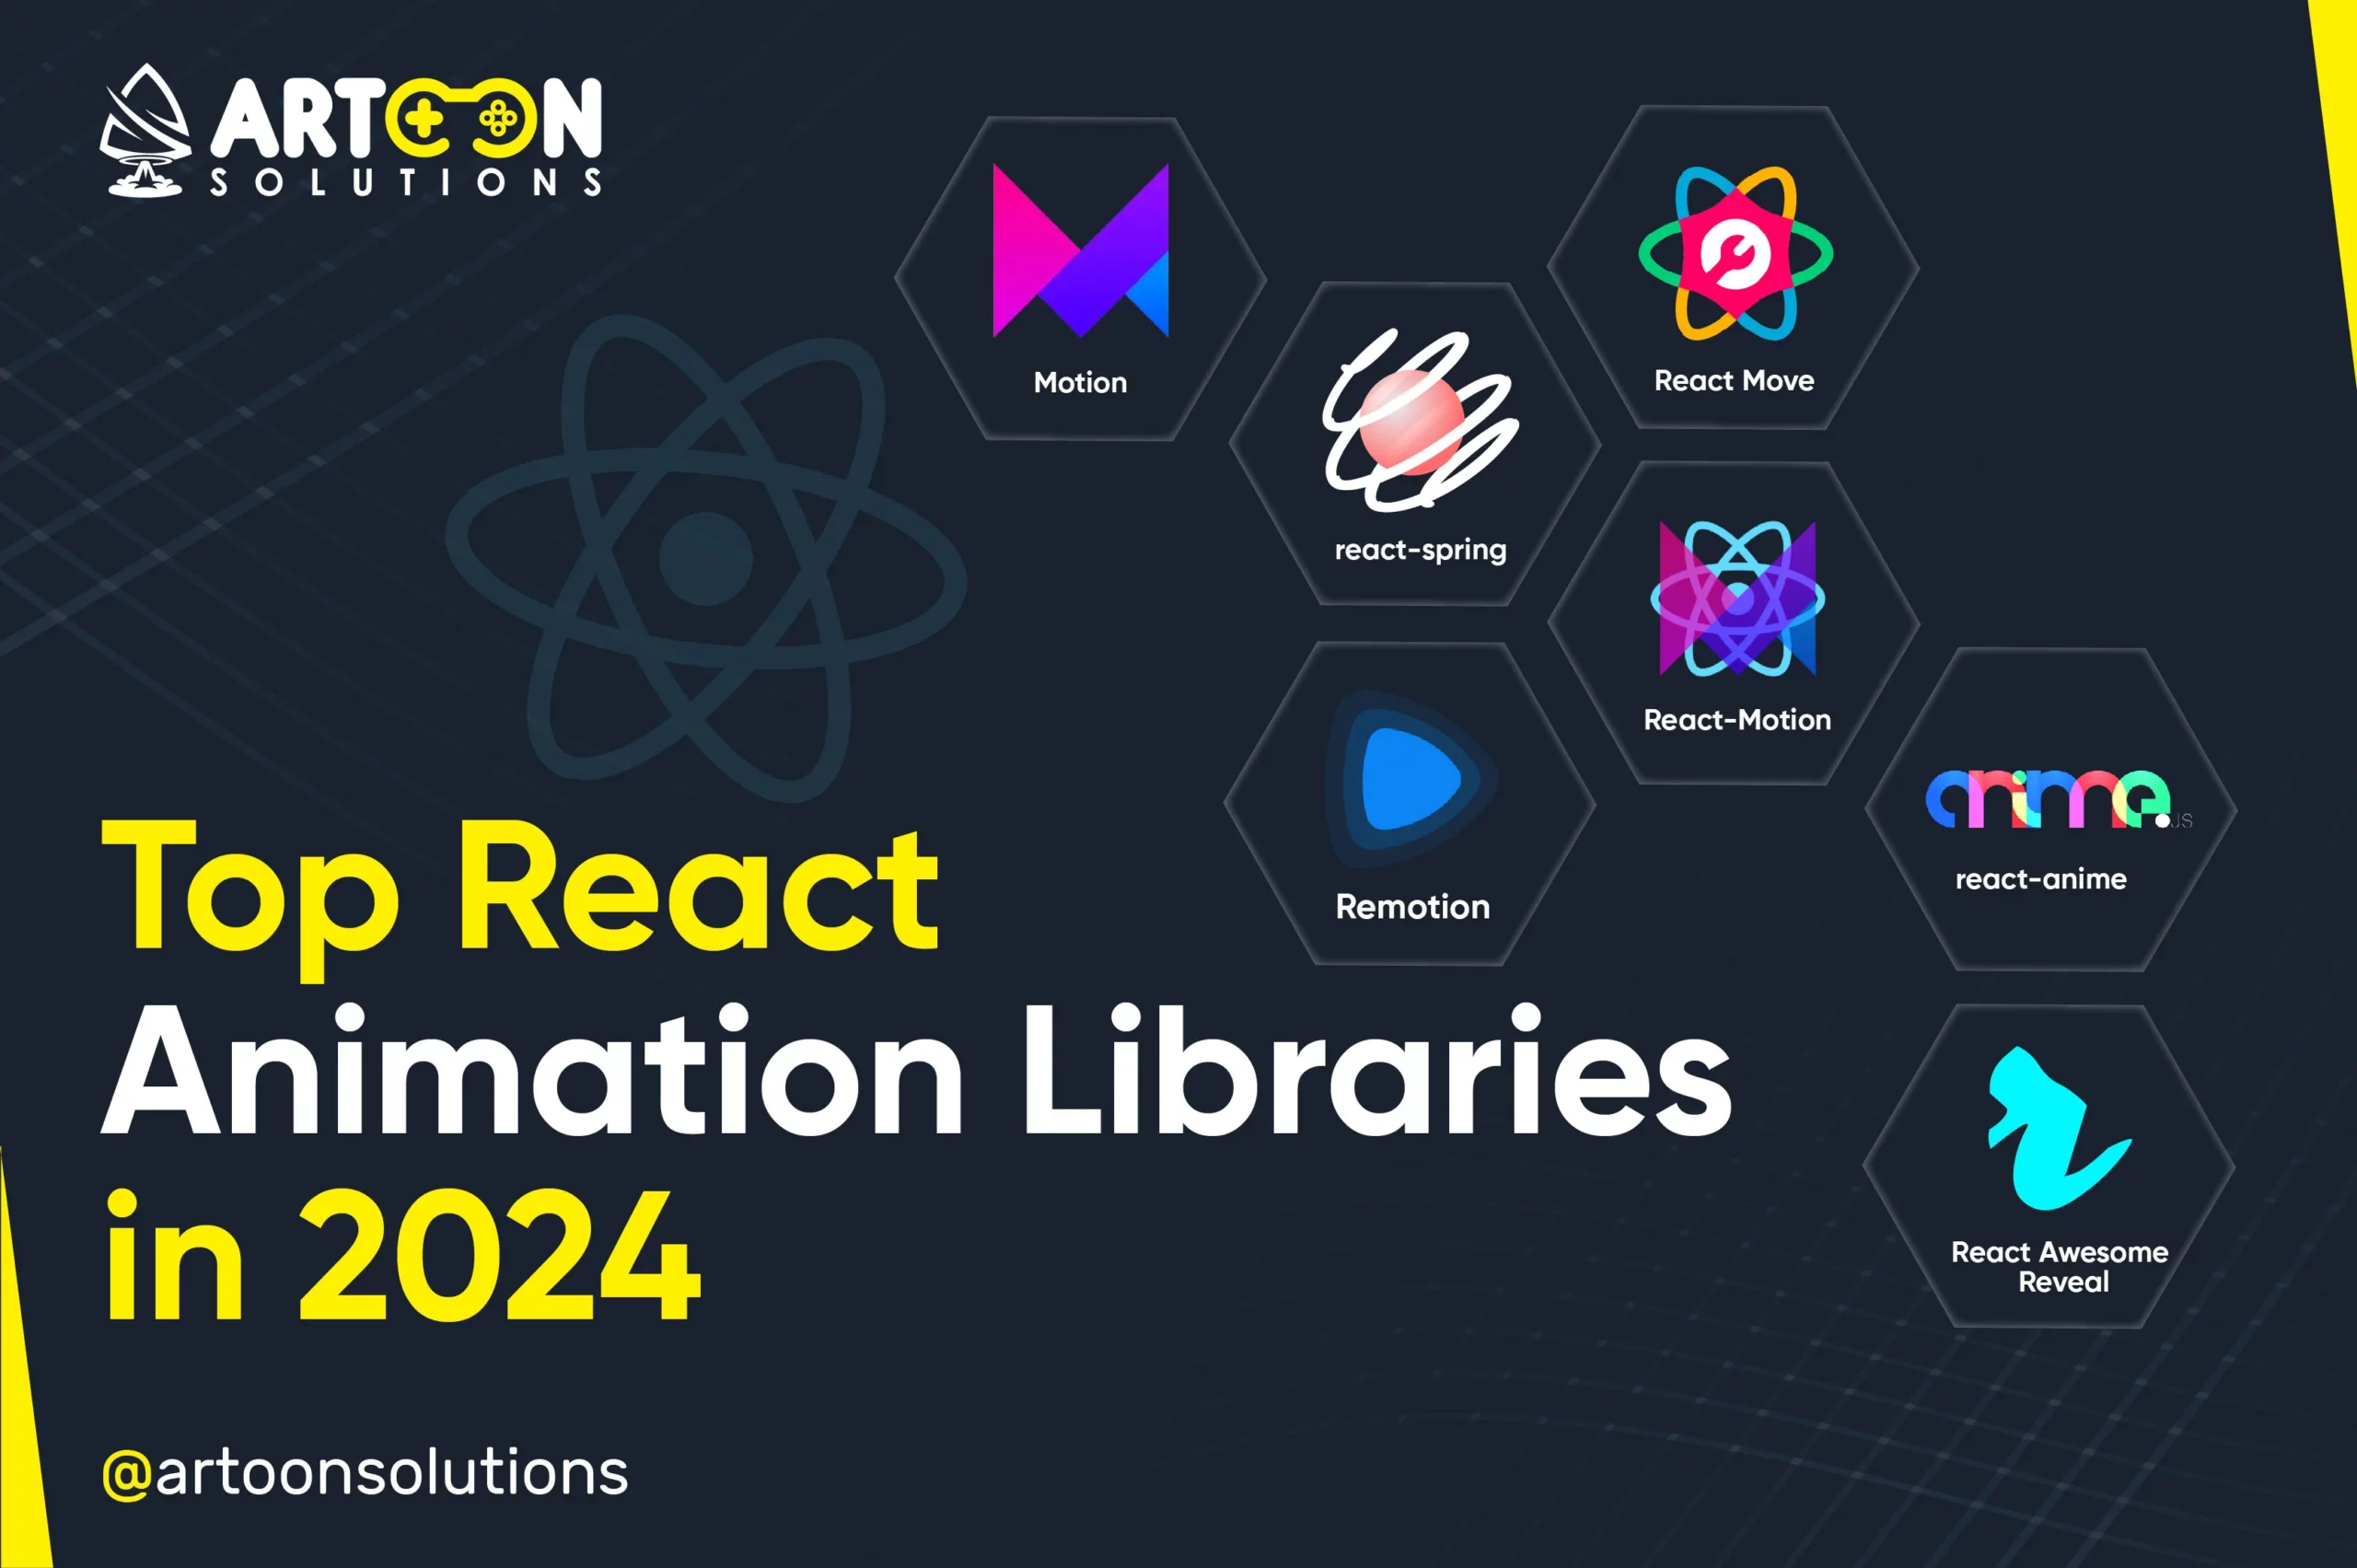 Top React Animation Libraries in 2024